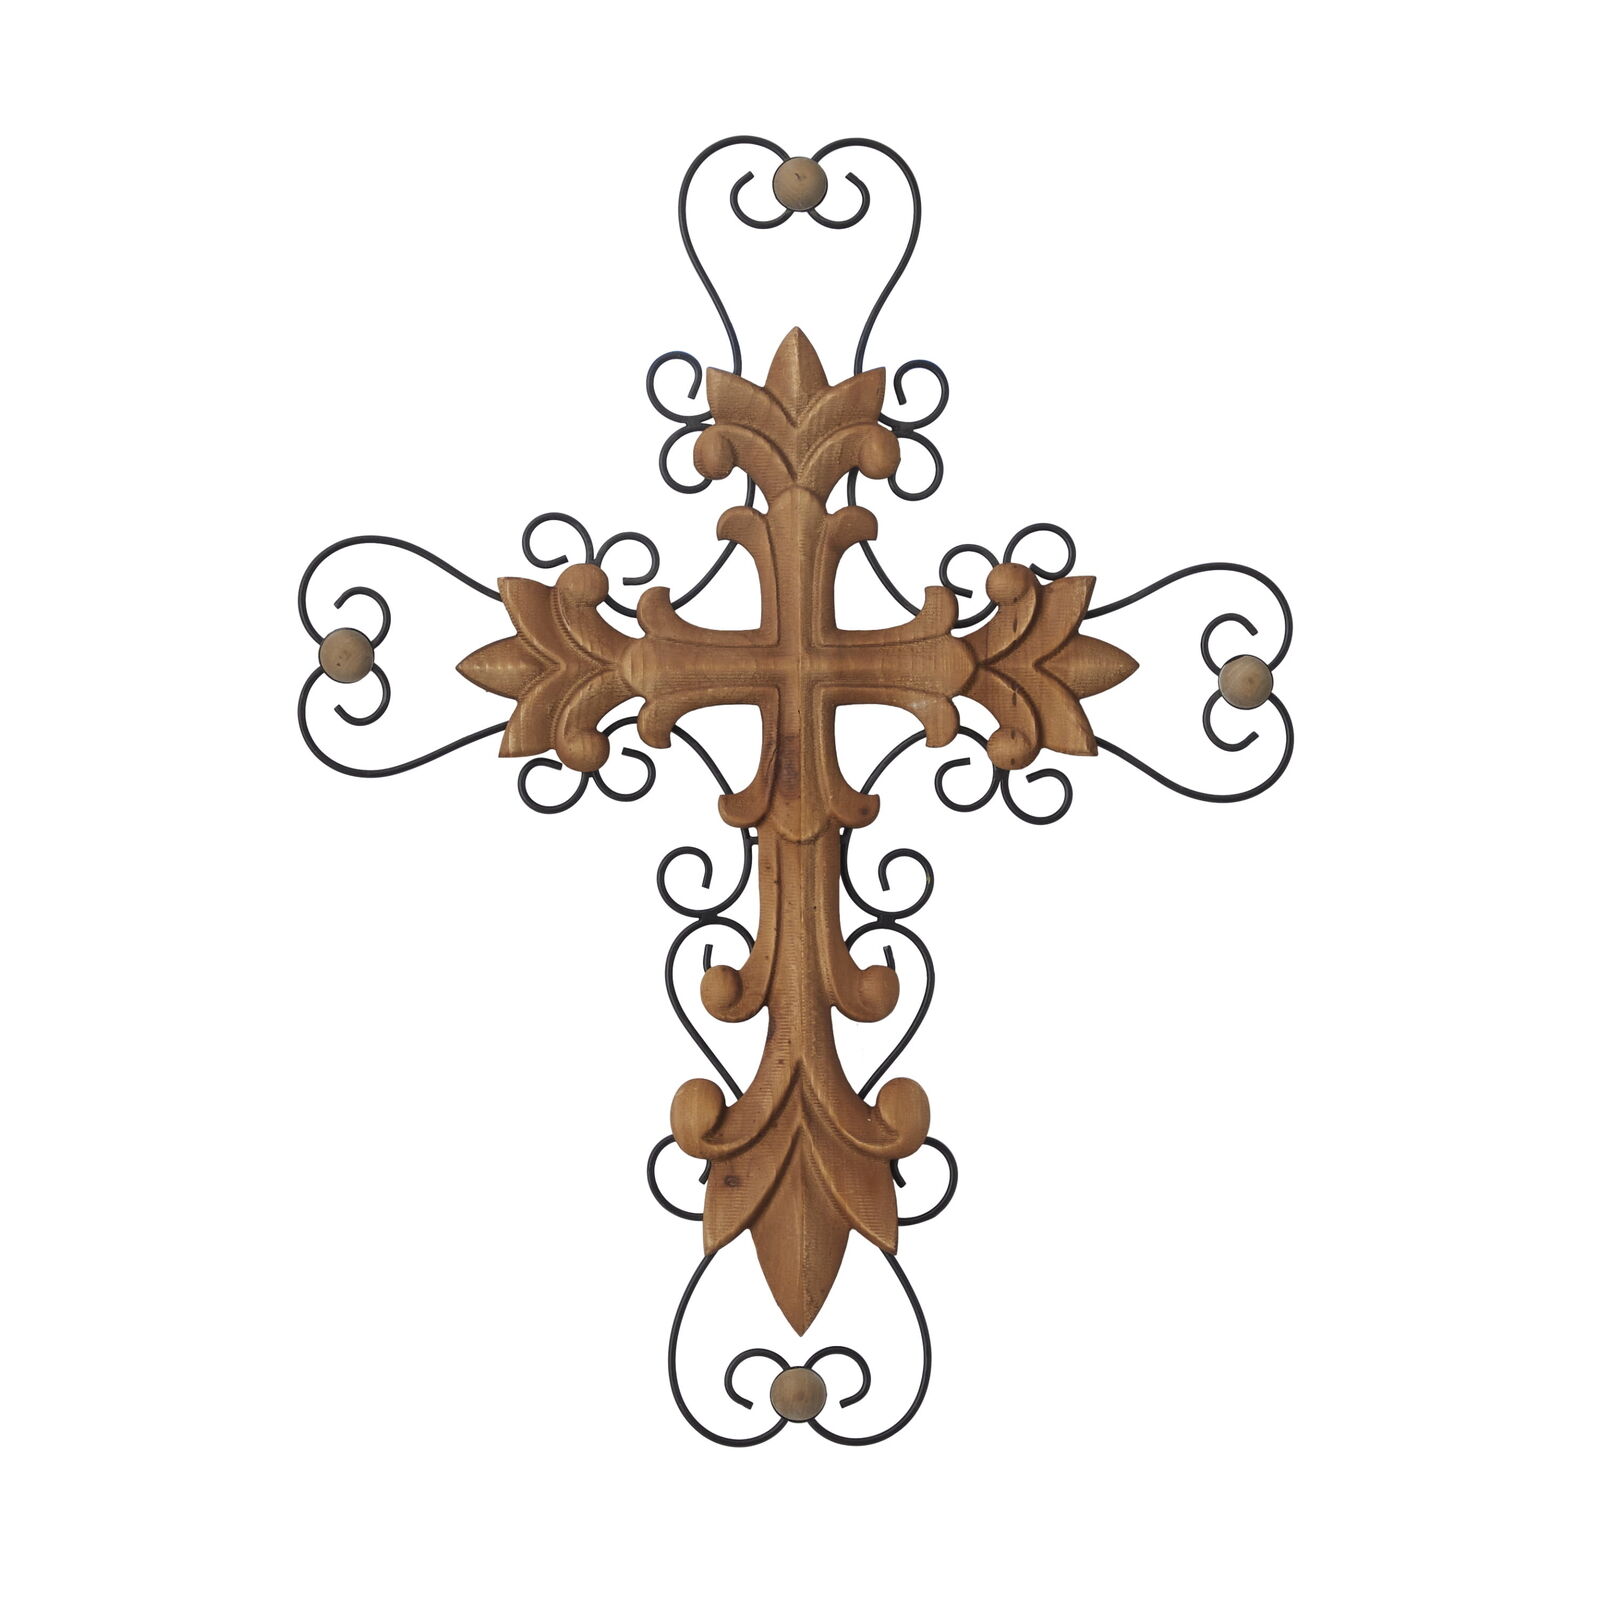 Brown Wood Carved Cross Wall Decor with Metal Scrollwork